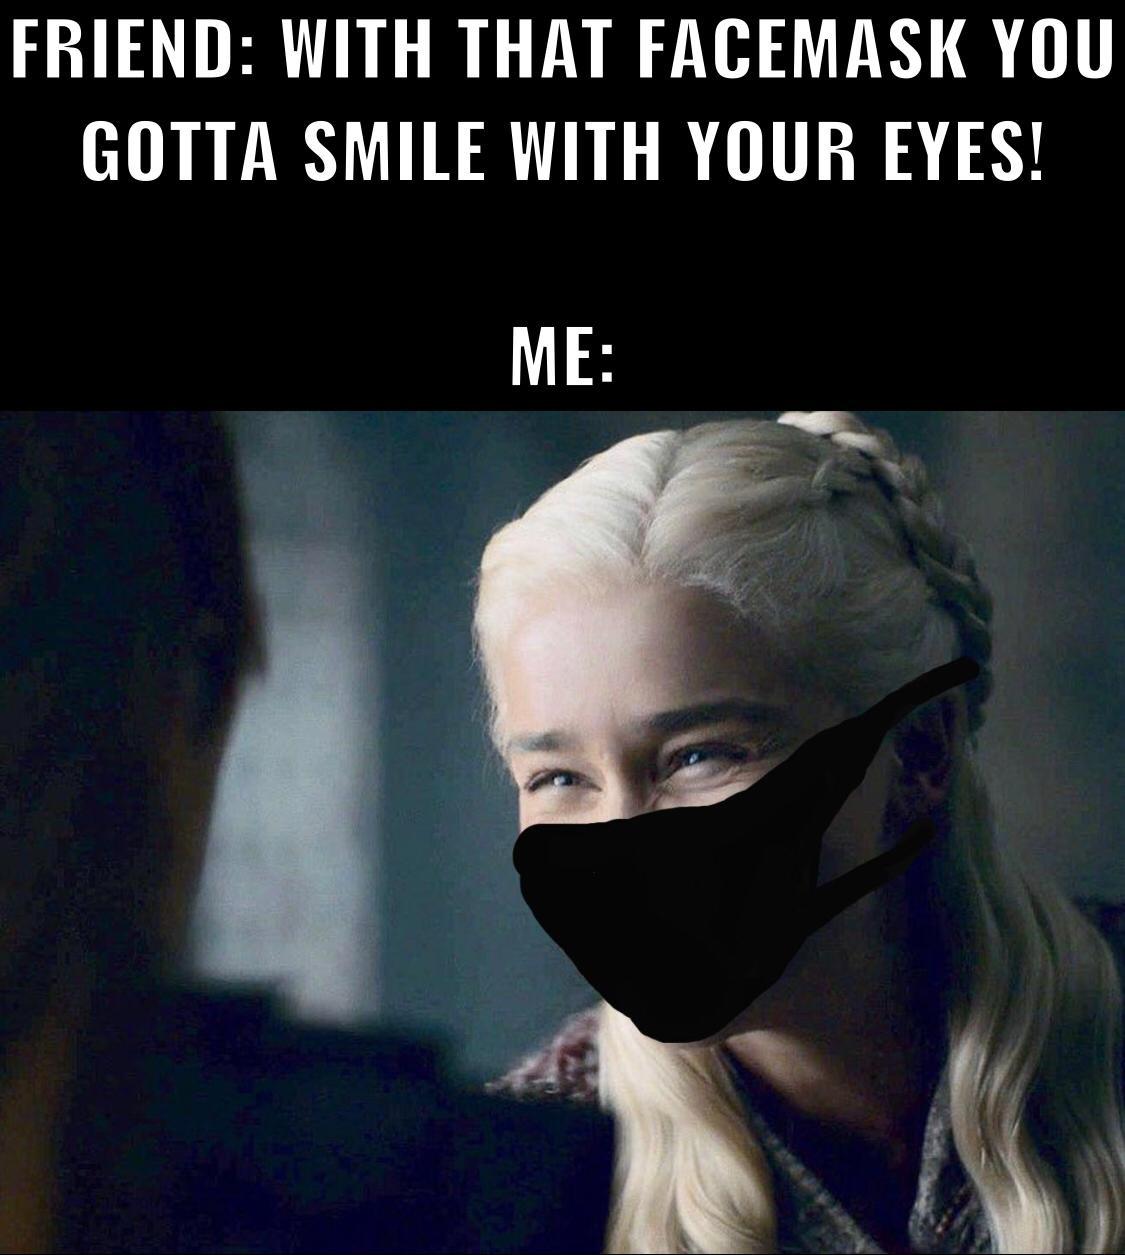 Game of thrones, KEEP SMILING Game of thrones memes Game of thrones, KEEP SMILING text: FRIEND: WITH THAT FACEMASK YOU GOTTA SMILE WITH YOUR EYES! 